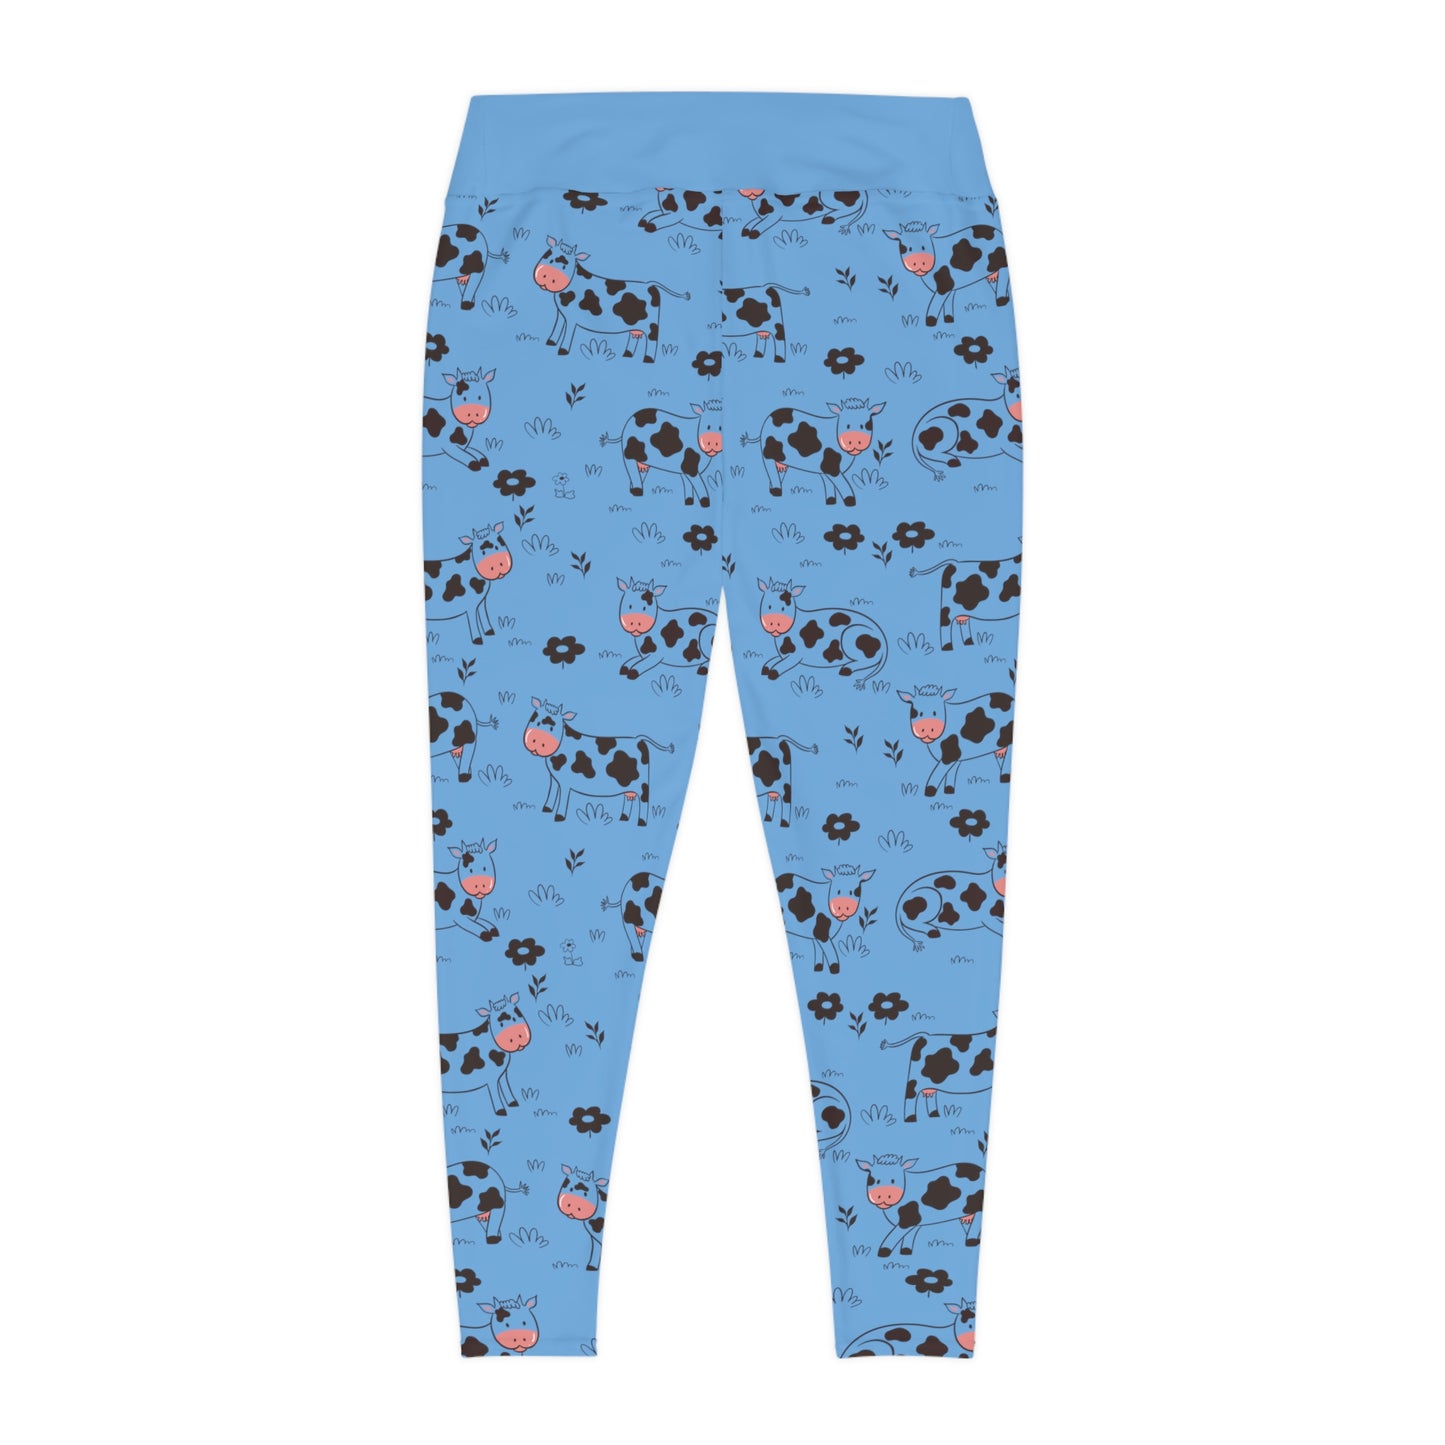 Cow Farm animal Plus Size Leggings One of a Kind Unique Workout Activewear tights for Mom fitness, Mothers Day, Girlfriend Christmas Gift